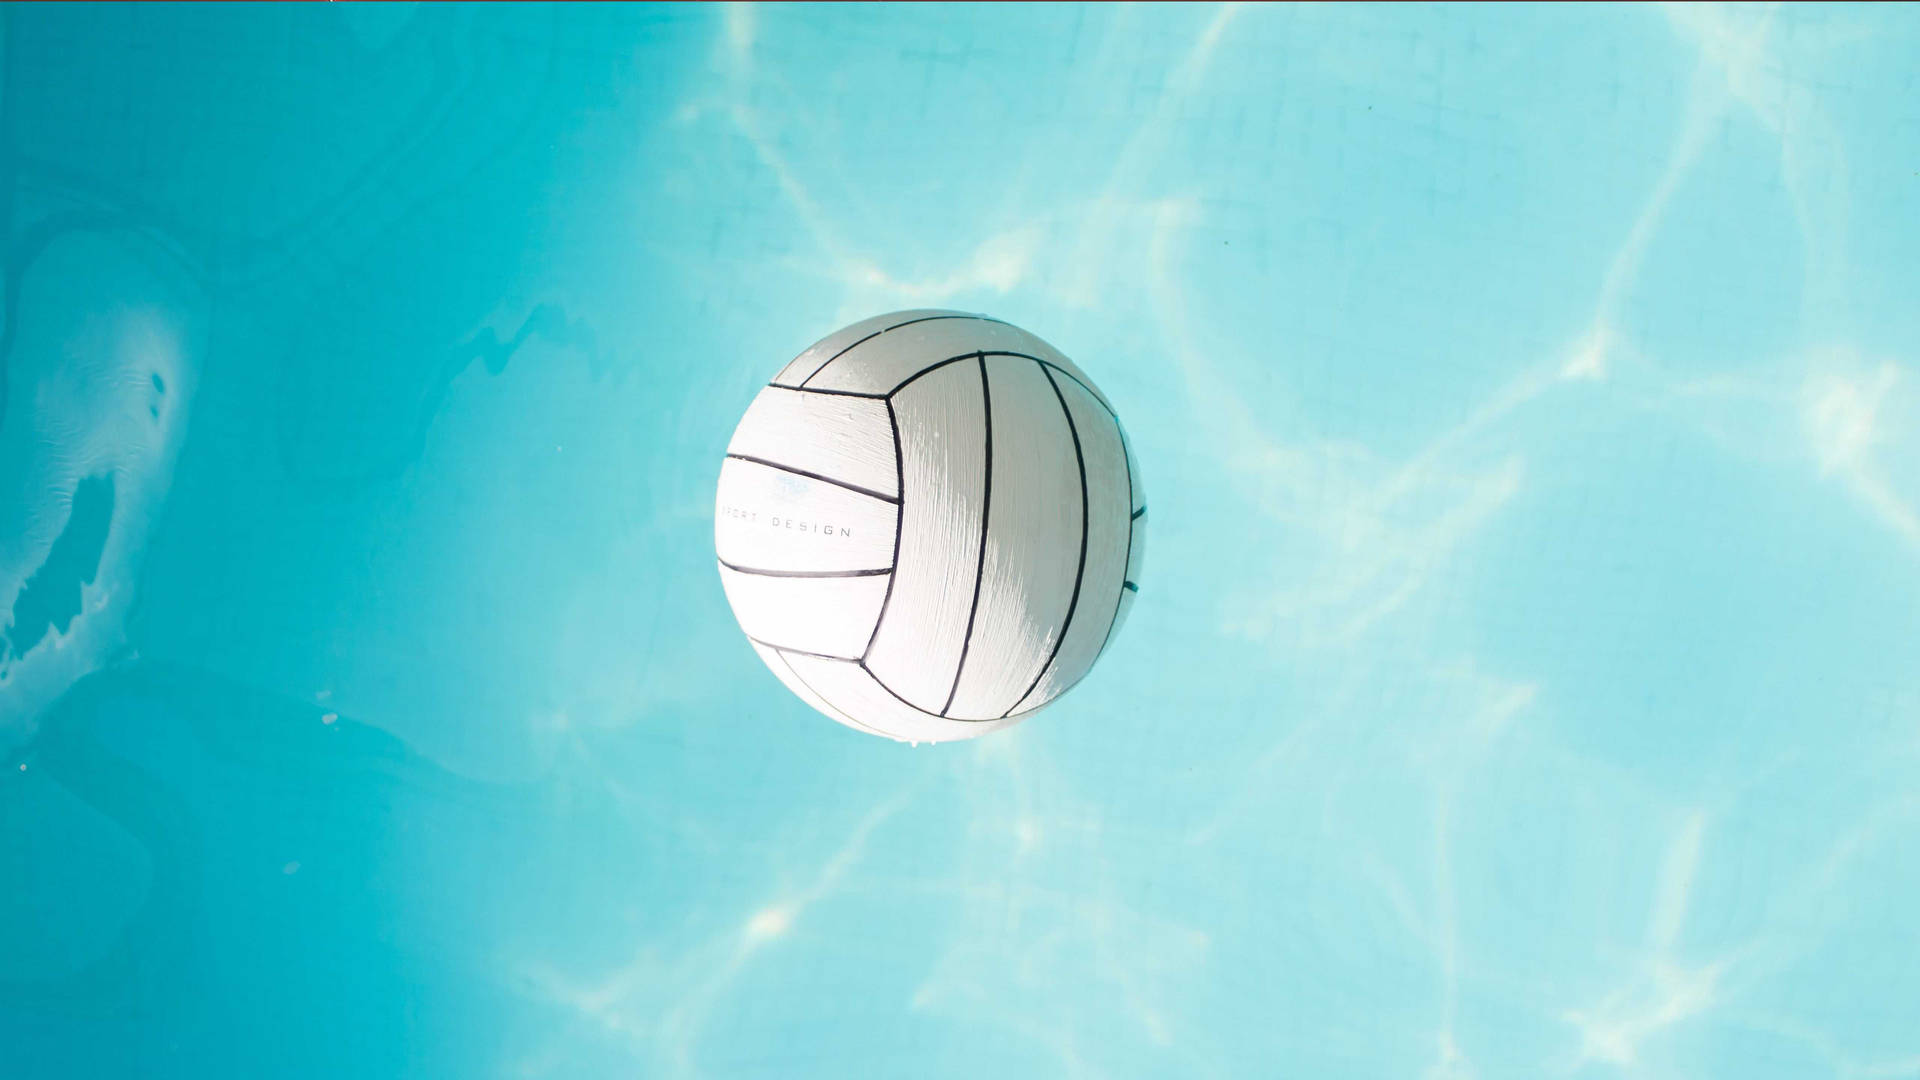 Floating Volleyball 4k Wallpaper